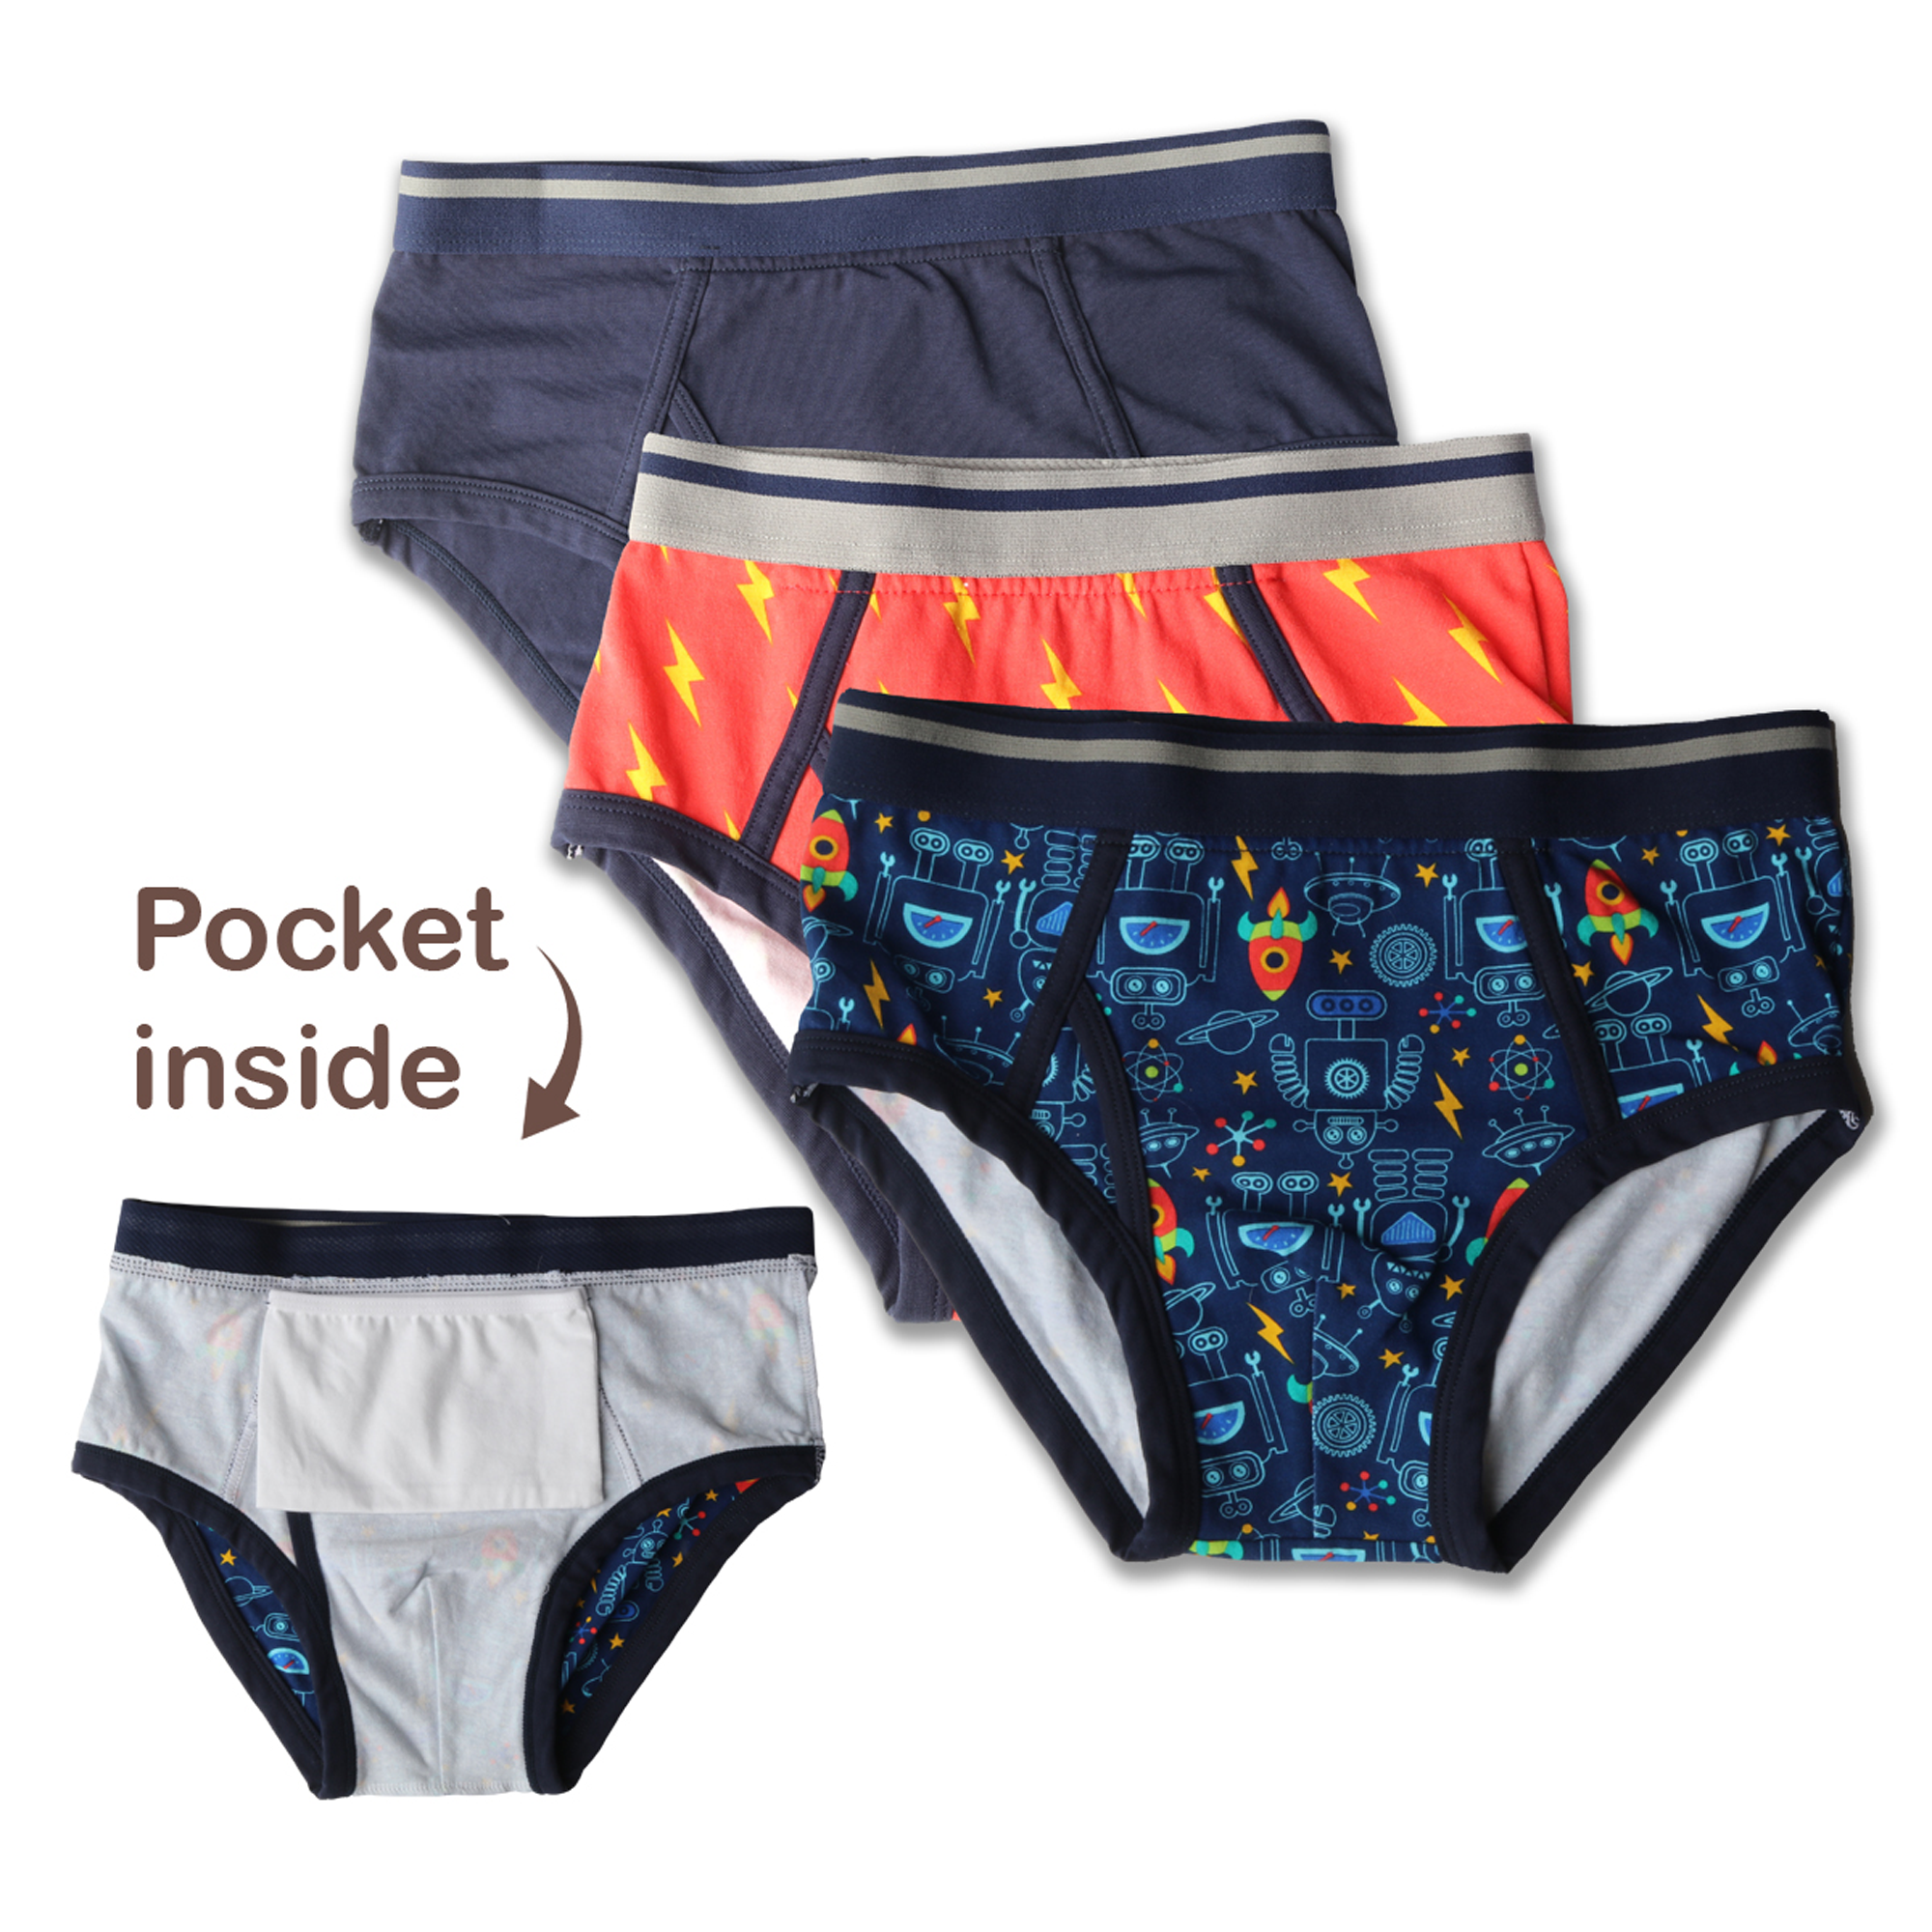 My Private Pocket Underwear for Boys - Variety 3 Pack